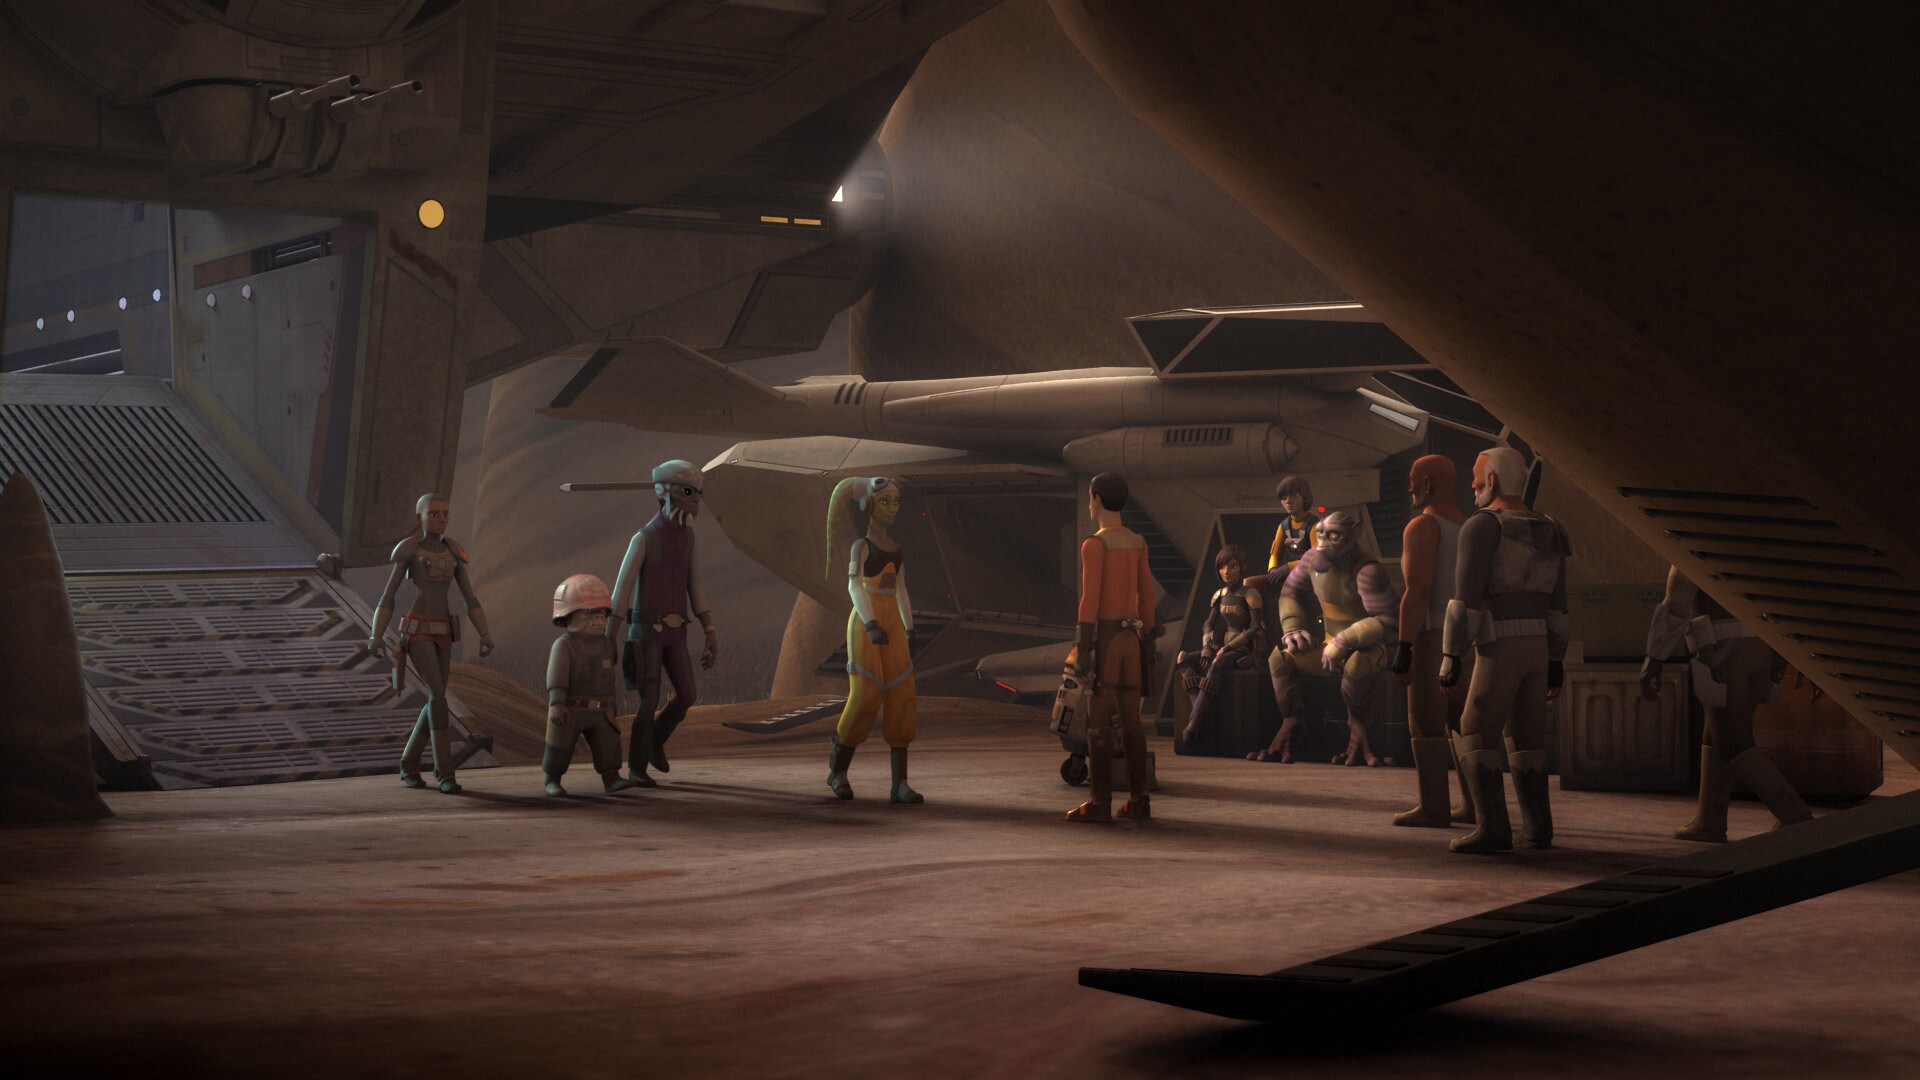 As the dust settles, the rebels are victorious. But it's not over. "Not until we chase the Empire...